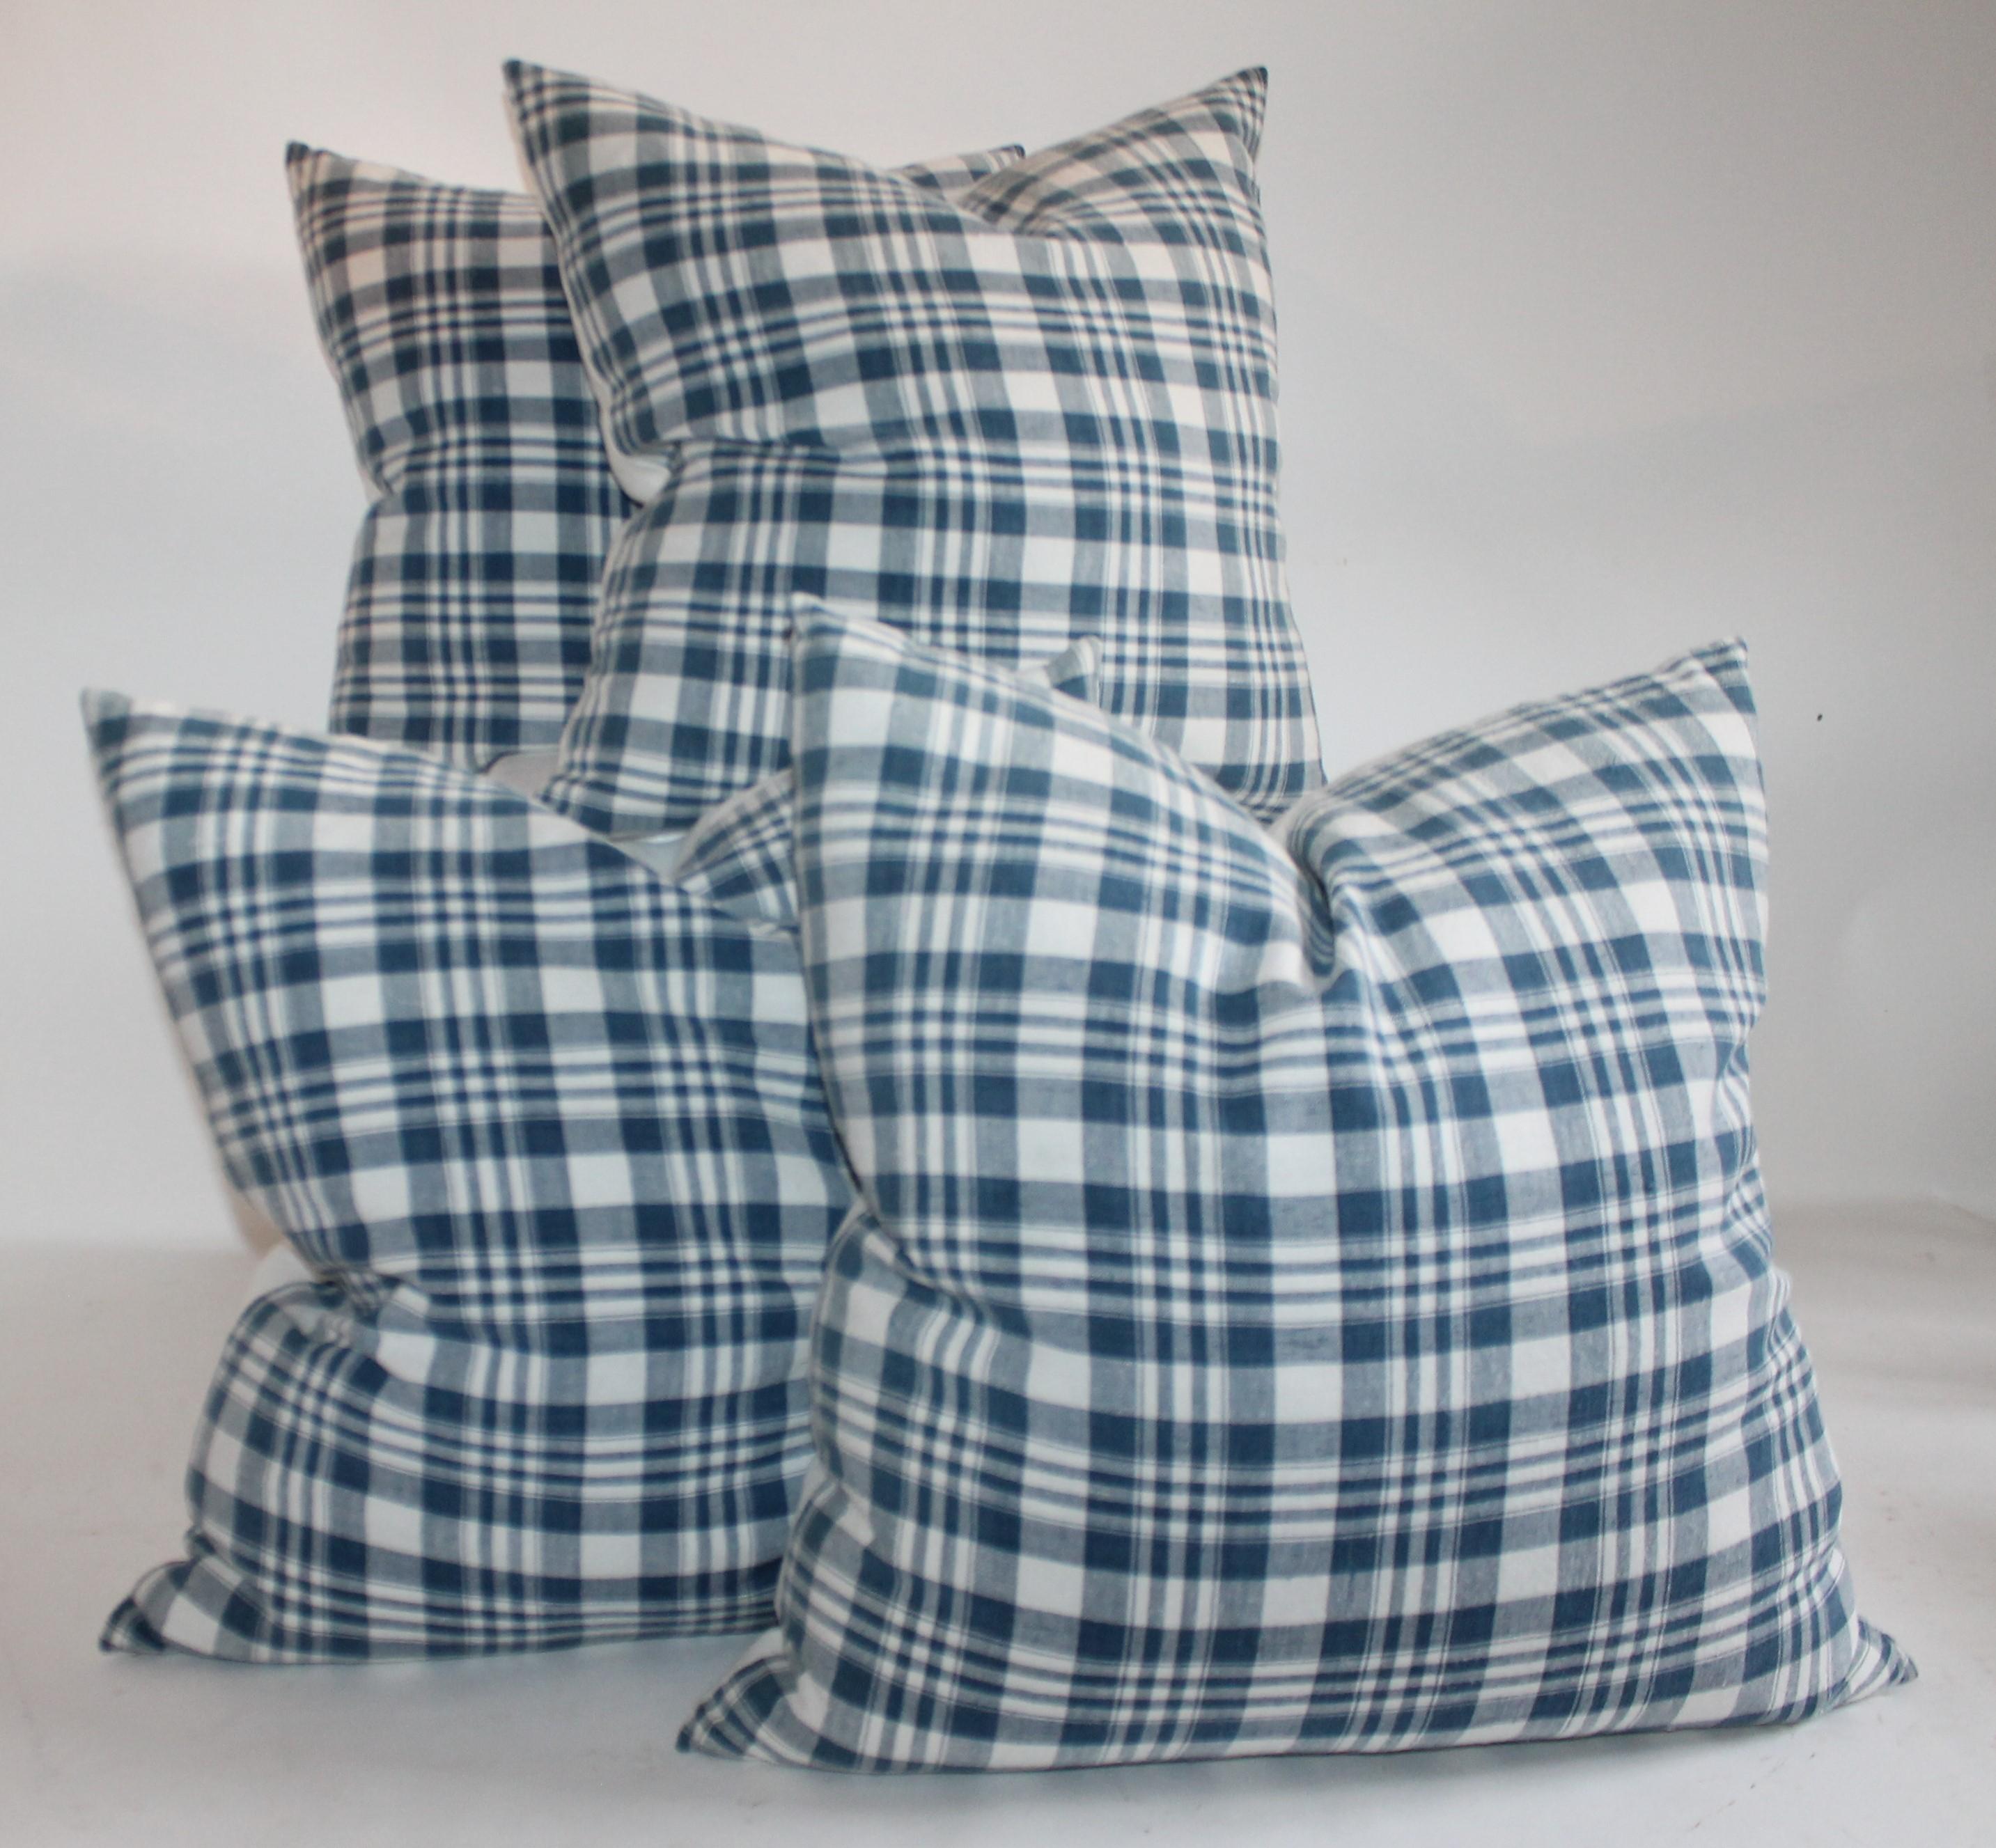 19h century blue & white homespun linen pillows with white linen backing. Down and feather fill inserts.

Larger pillows measure: 22 x 22

Smaller pillows measure: 20 x 20.




   